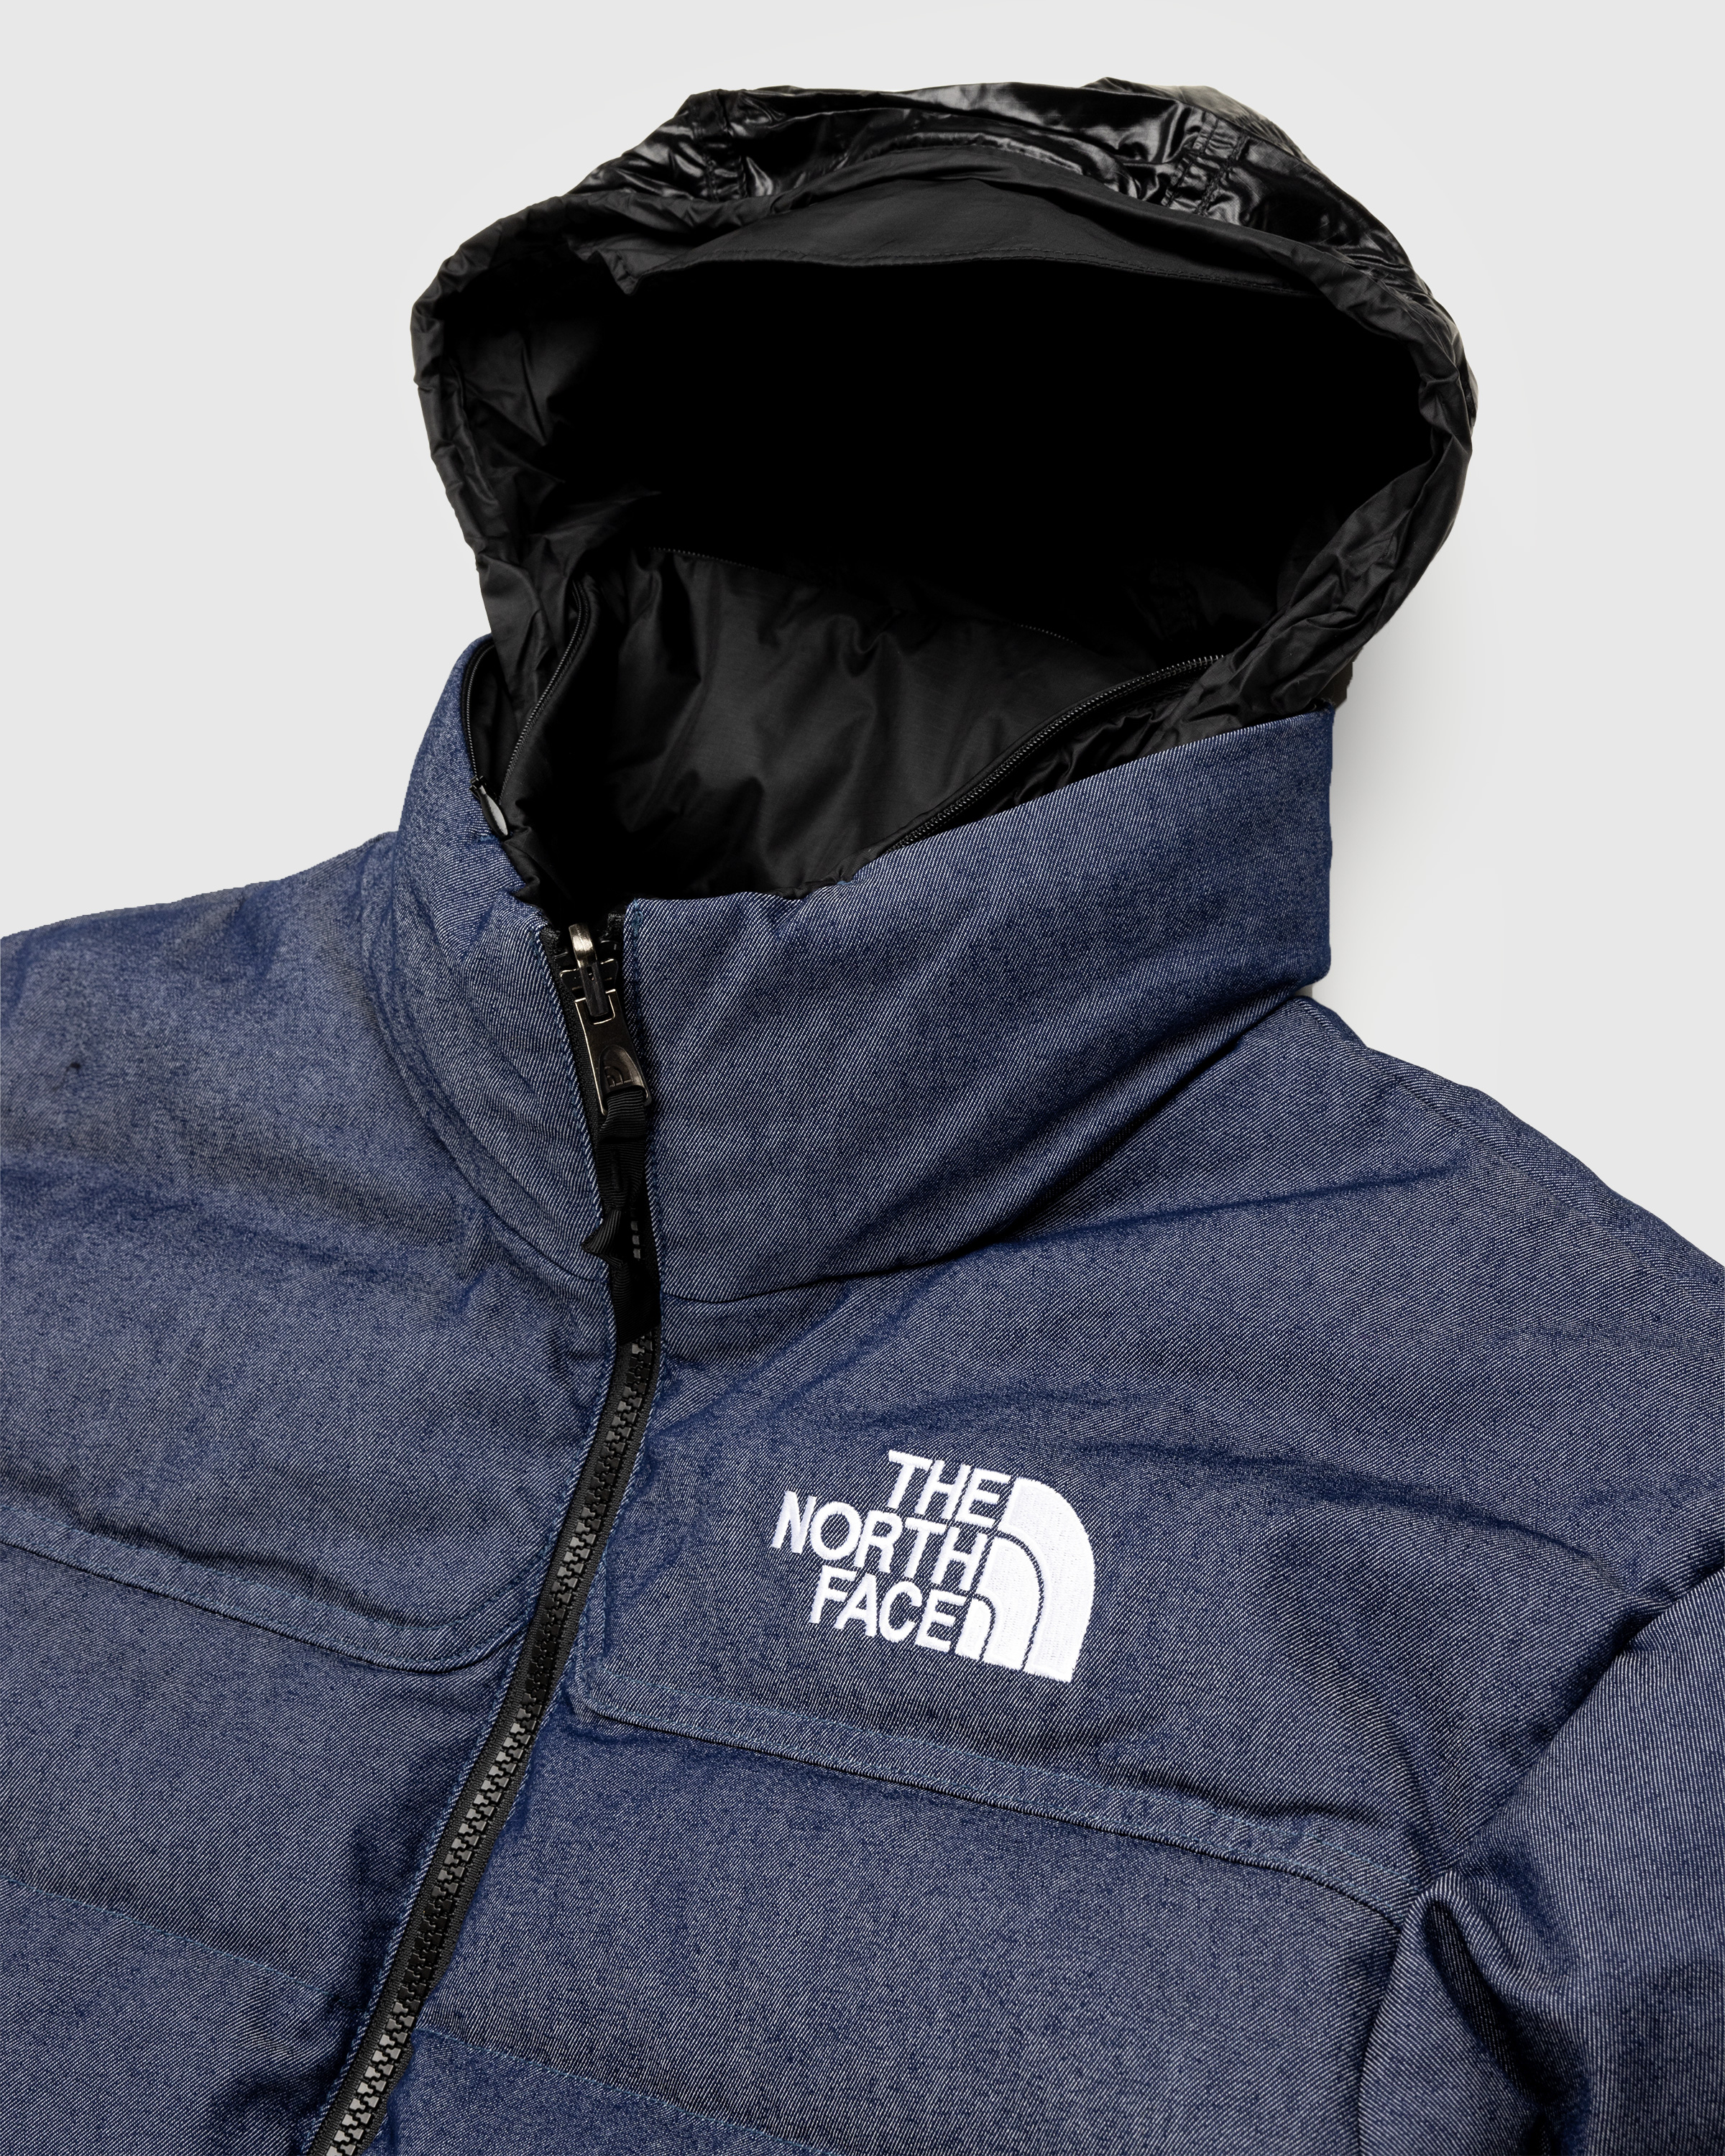 The North Face – ’92 Reversible Nuptse Jacket Sulphur Moss/Coal Brown-2 - Outerwear - Blue - Image 7